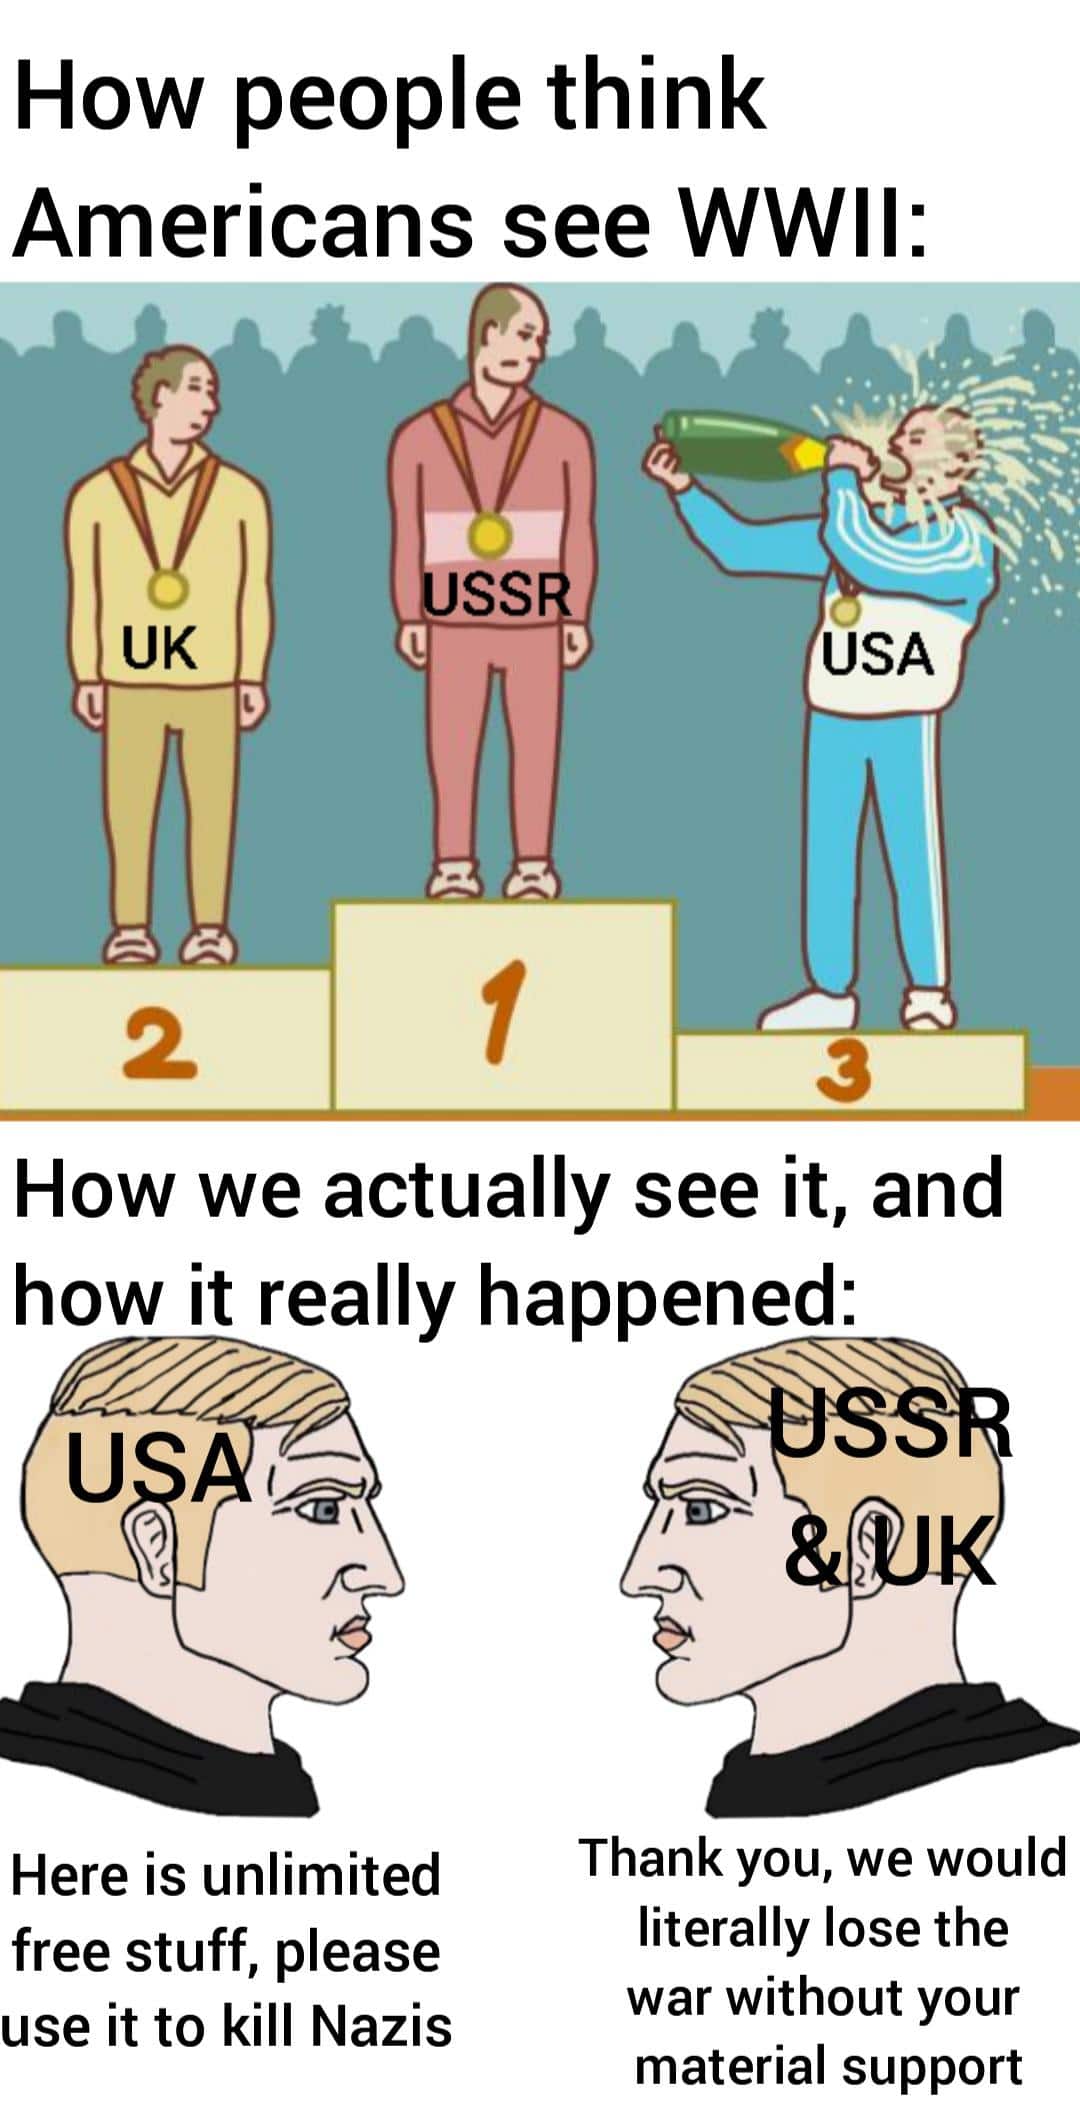 History, American, USSR, British, UK, Soviets History Memes History, American, USSR, British, UK, Soviets text: How people think Americans see WWII: UK 2 USA 3 How we actually see it, and how it really happened: 2 Here is unlimited free stuff, please use it to kill Nazis Thank you, we would literally lose the war without your material support 